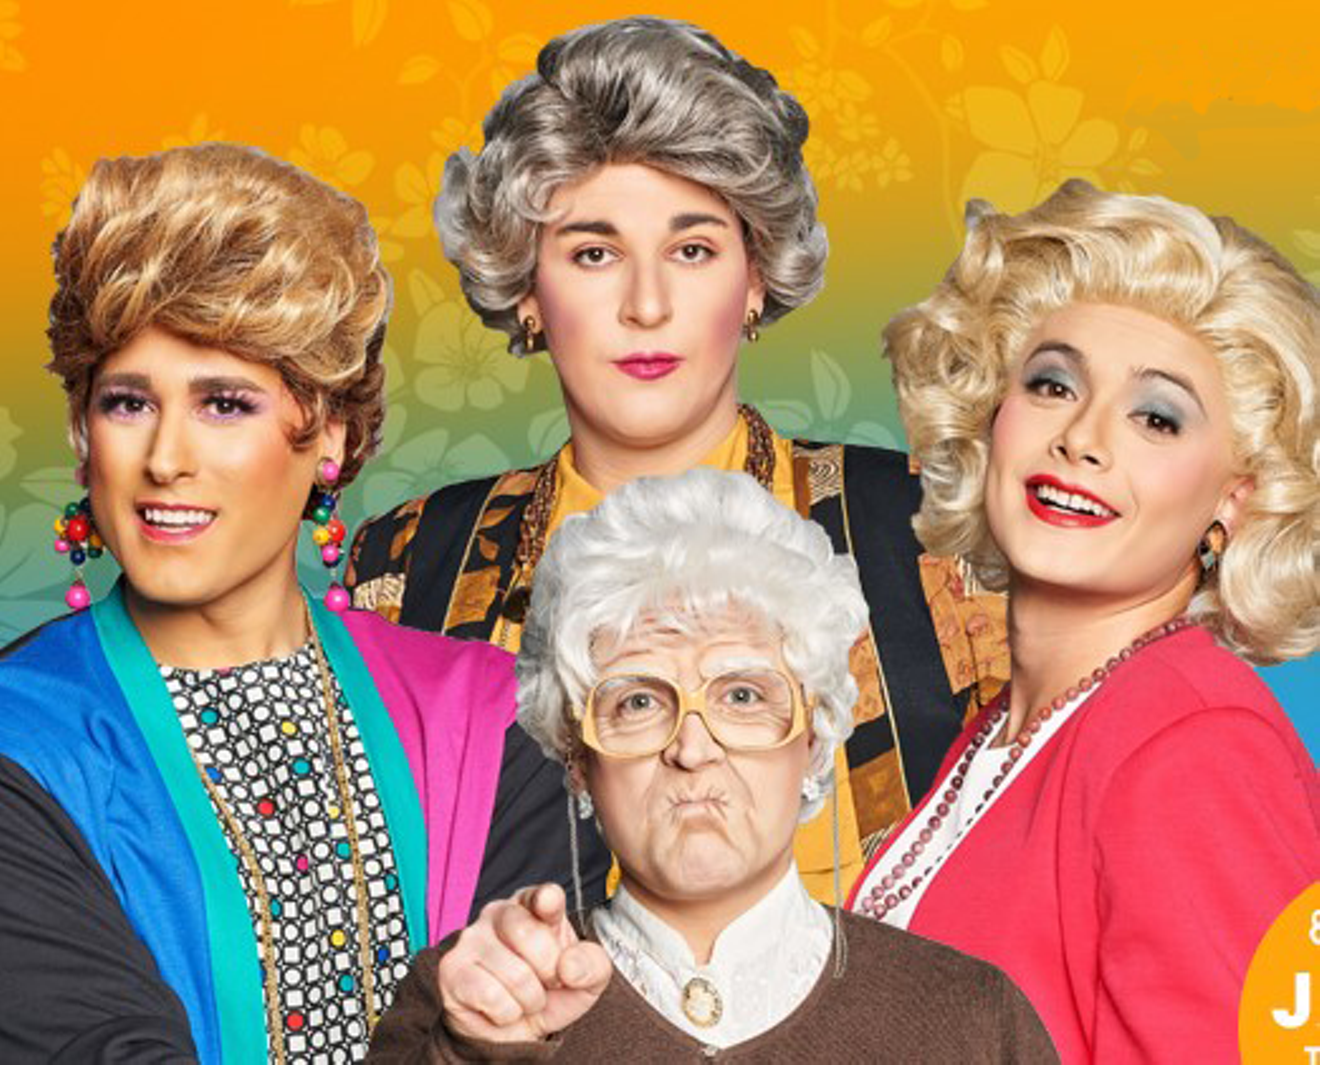 The Golden Girls: The Laughs Continue will star (clockwise from left) Vince Kelley as Blanche Devereaux, Ryan Bernier as Dorothy Zbornak, Adam Graber as Rose Nylund and Christopher Kamm as Sophia Petrillo.